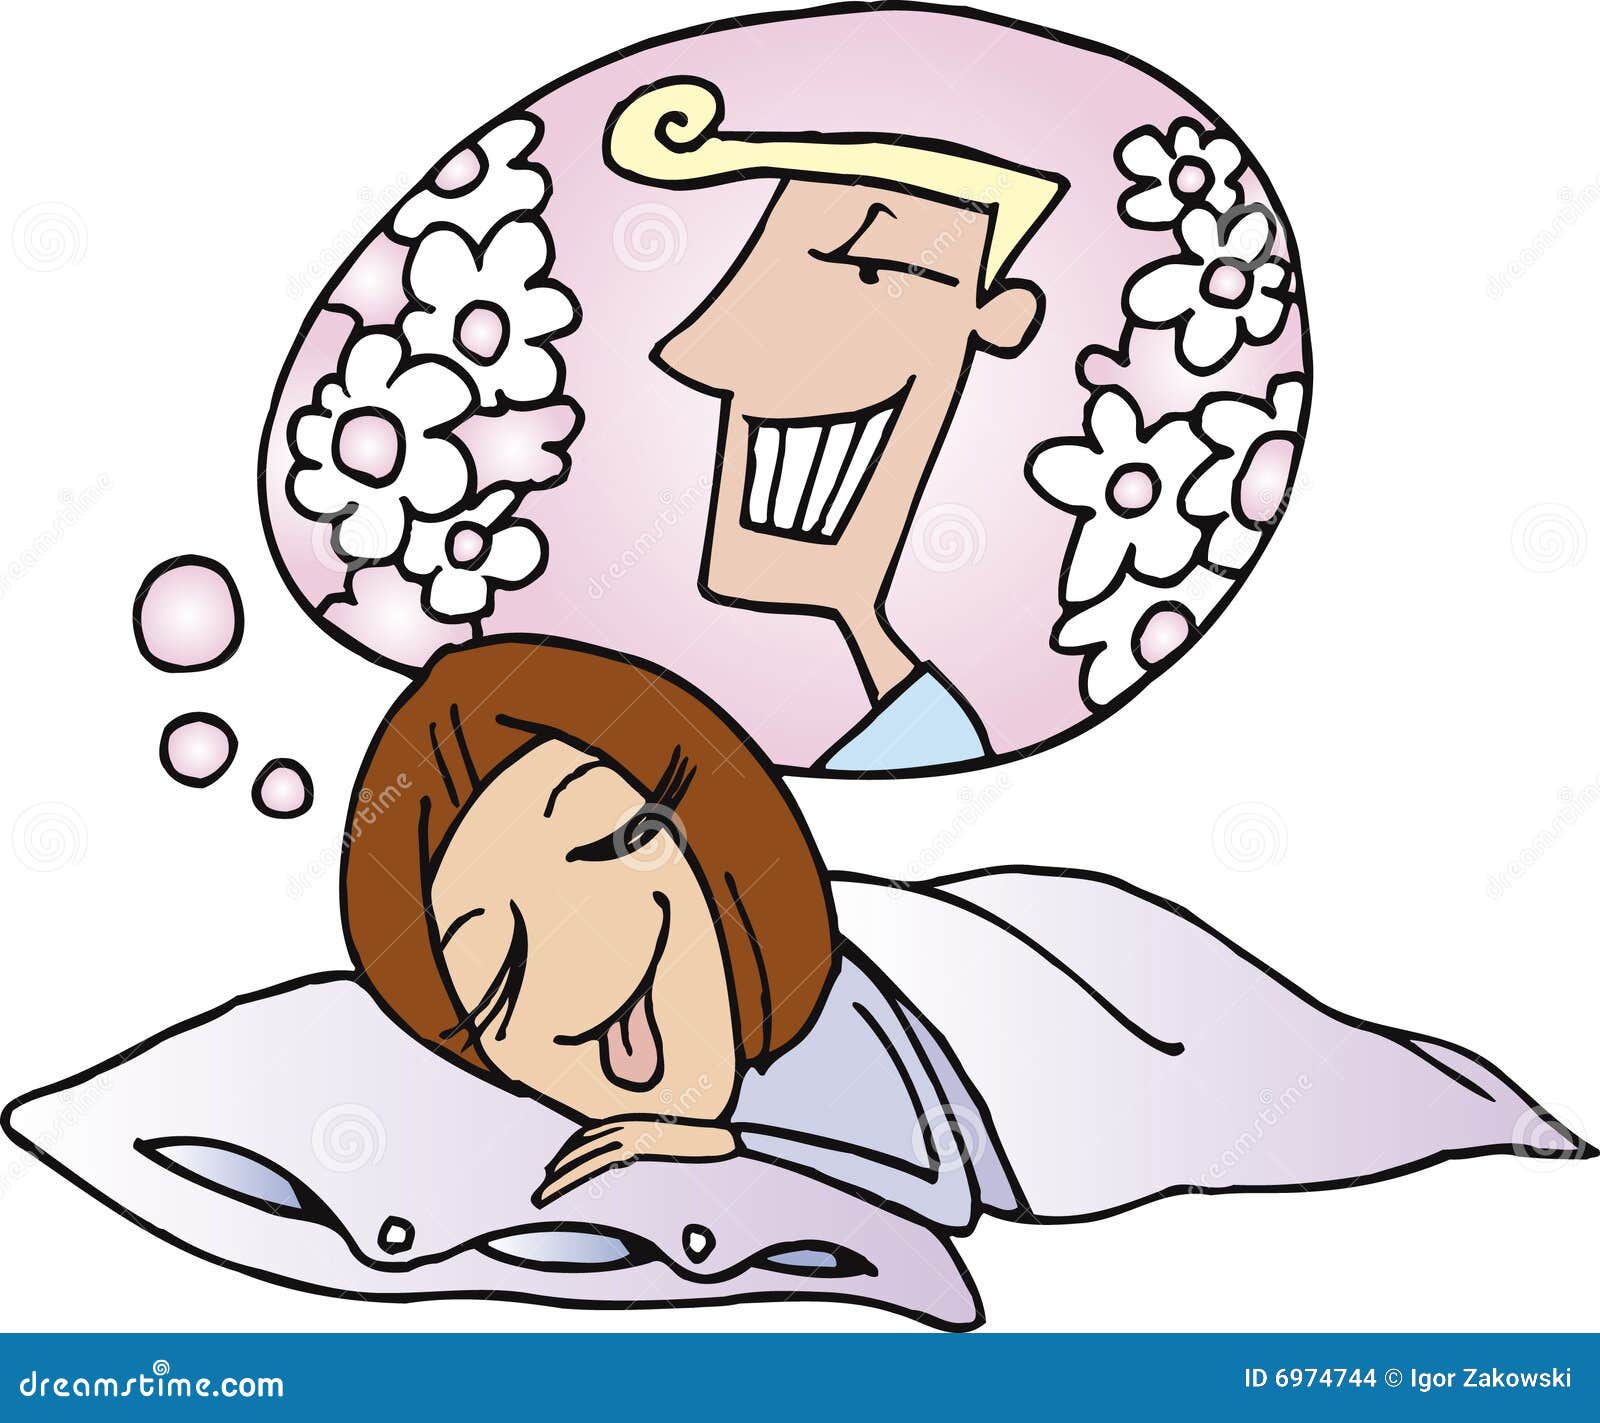 Girl dreaming about boy stock vector. Illustration of